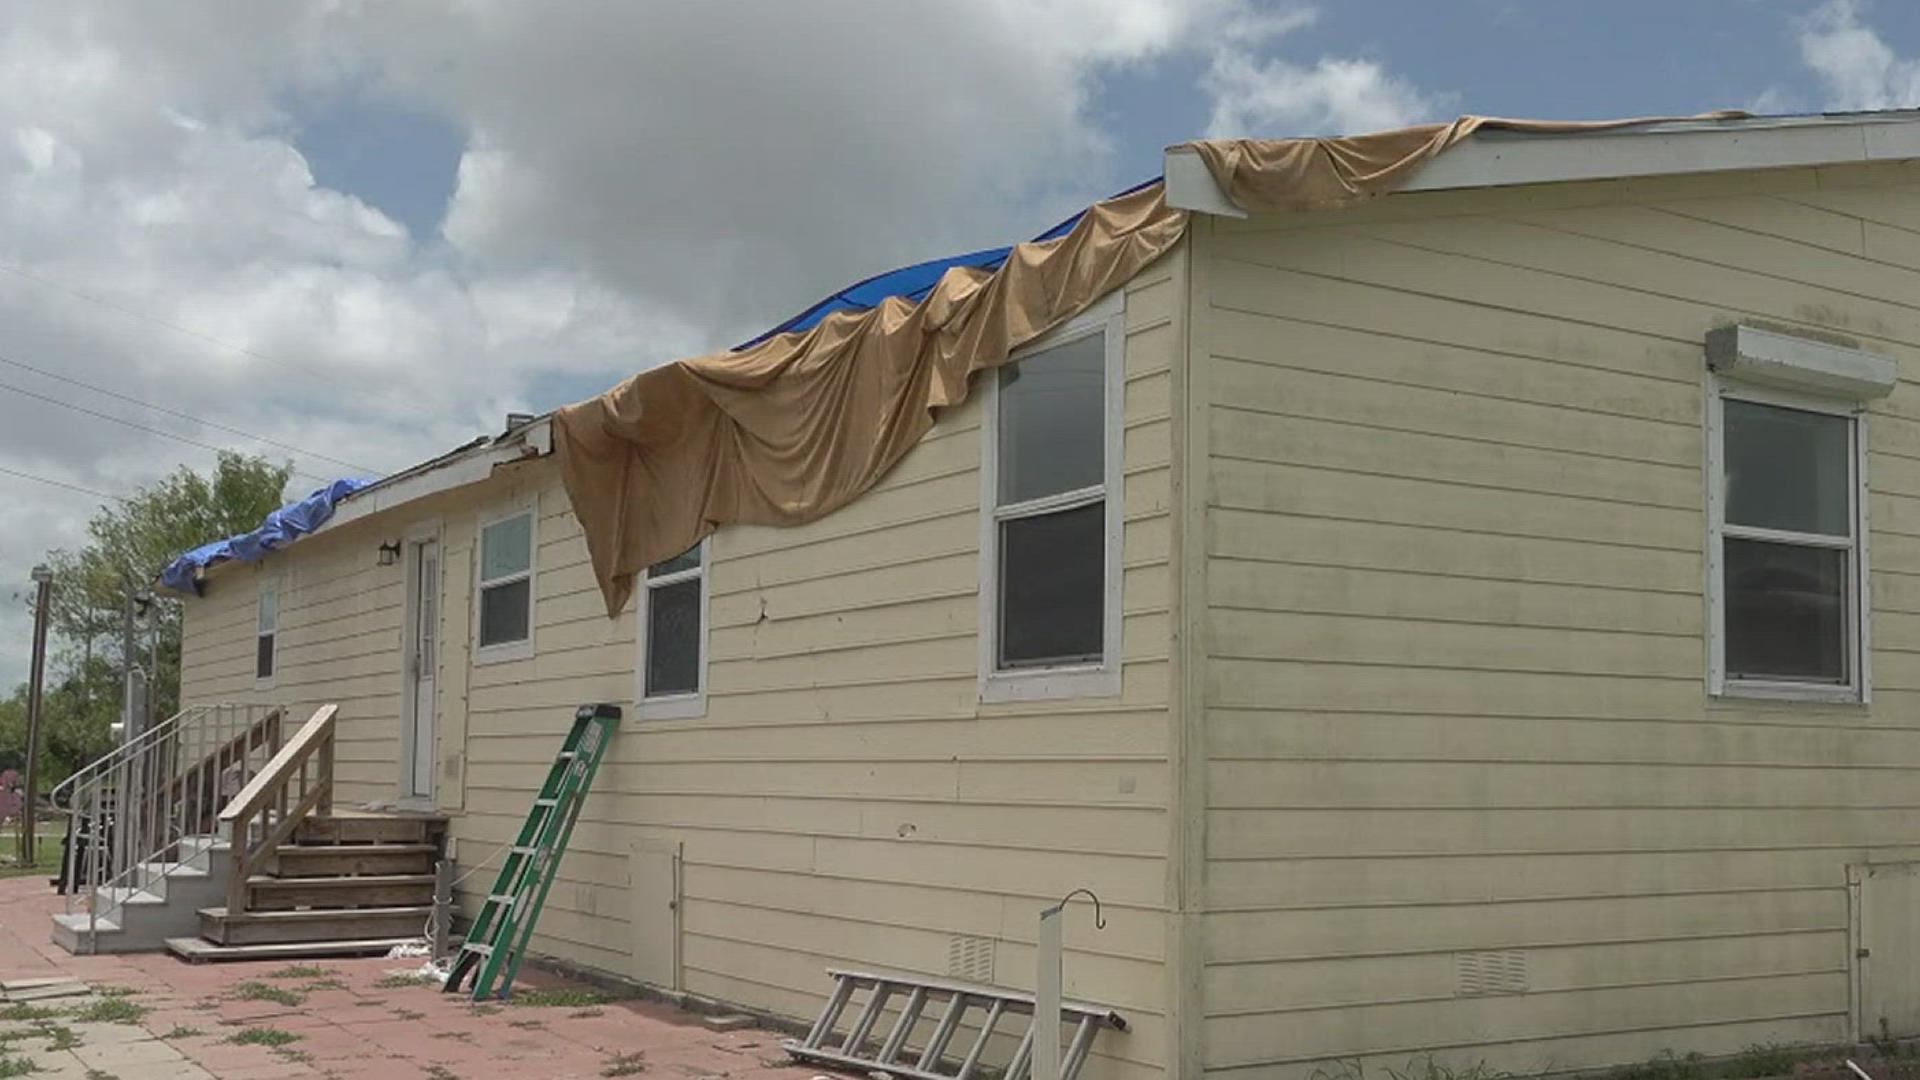 One Rockport couple hopes that the Coastal Bend is not impacted by Hurricane Beryl because they are still trying to repair their home from Tropical Storm Alberto.